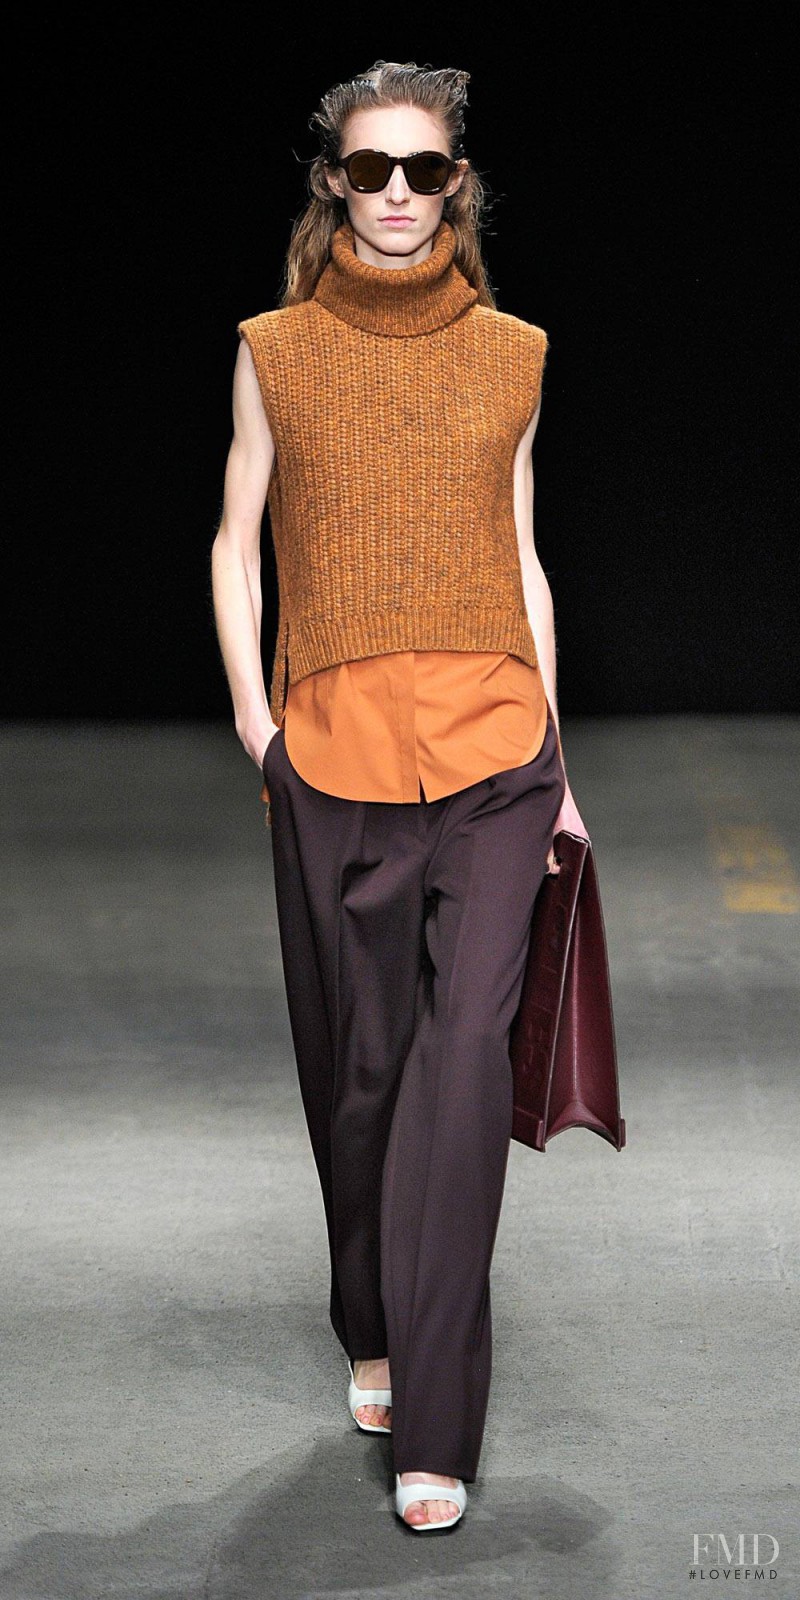 Manuela Frey featured in  the 3.1 Phillip Lim fashion show for Autumn/Winter 2014